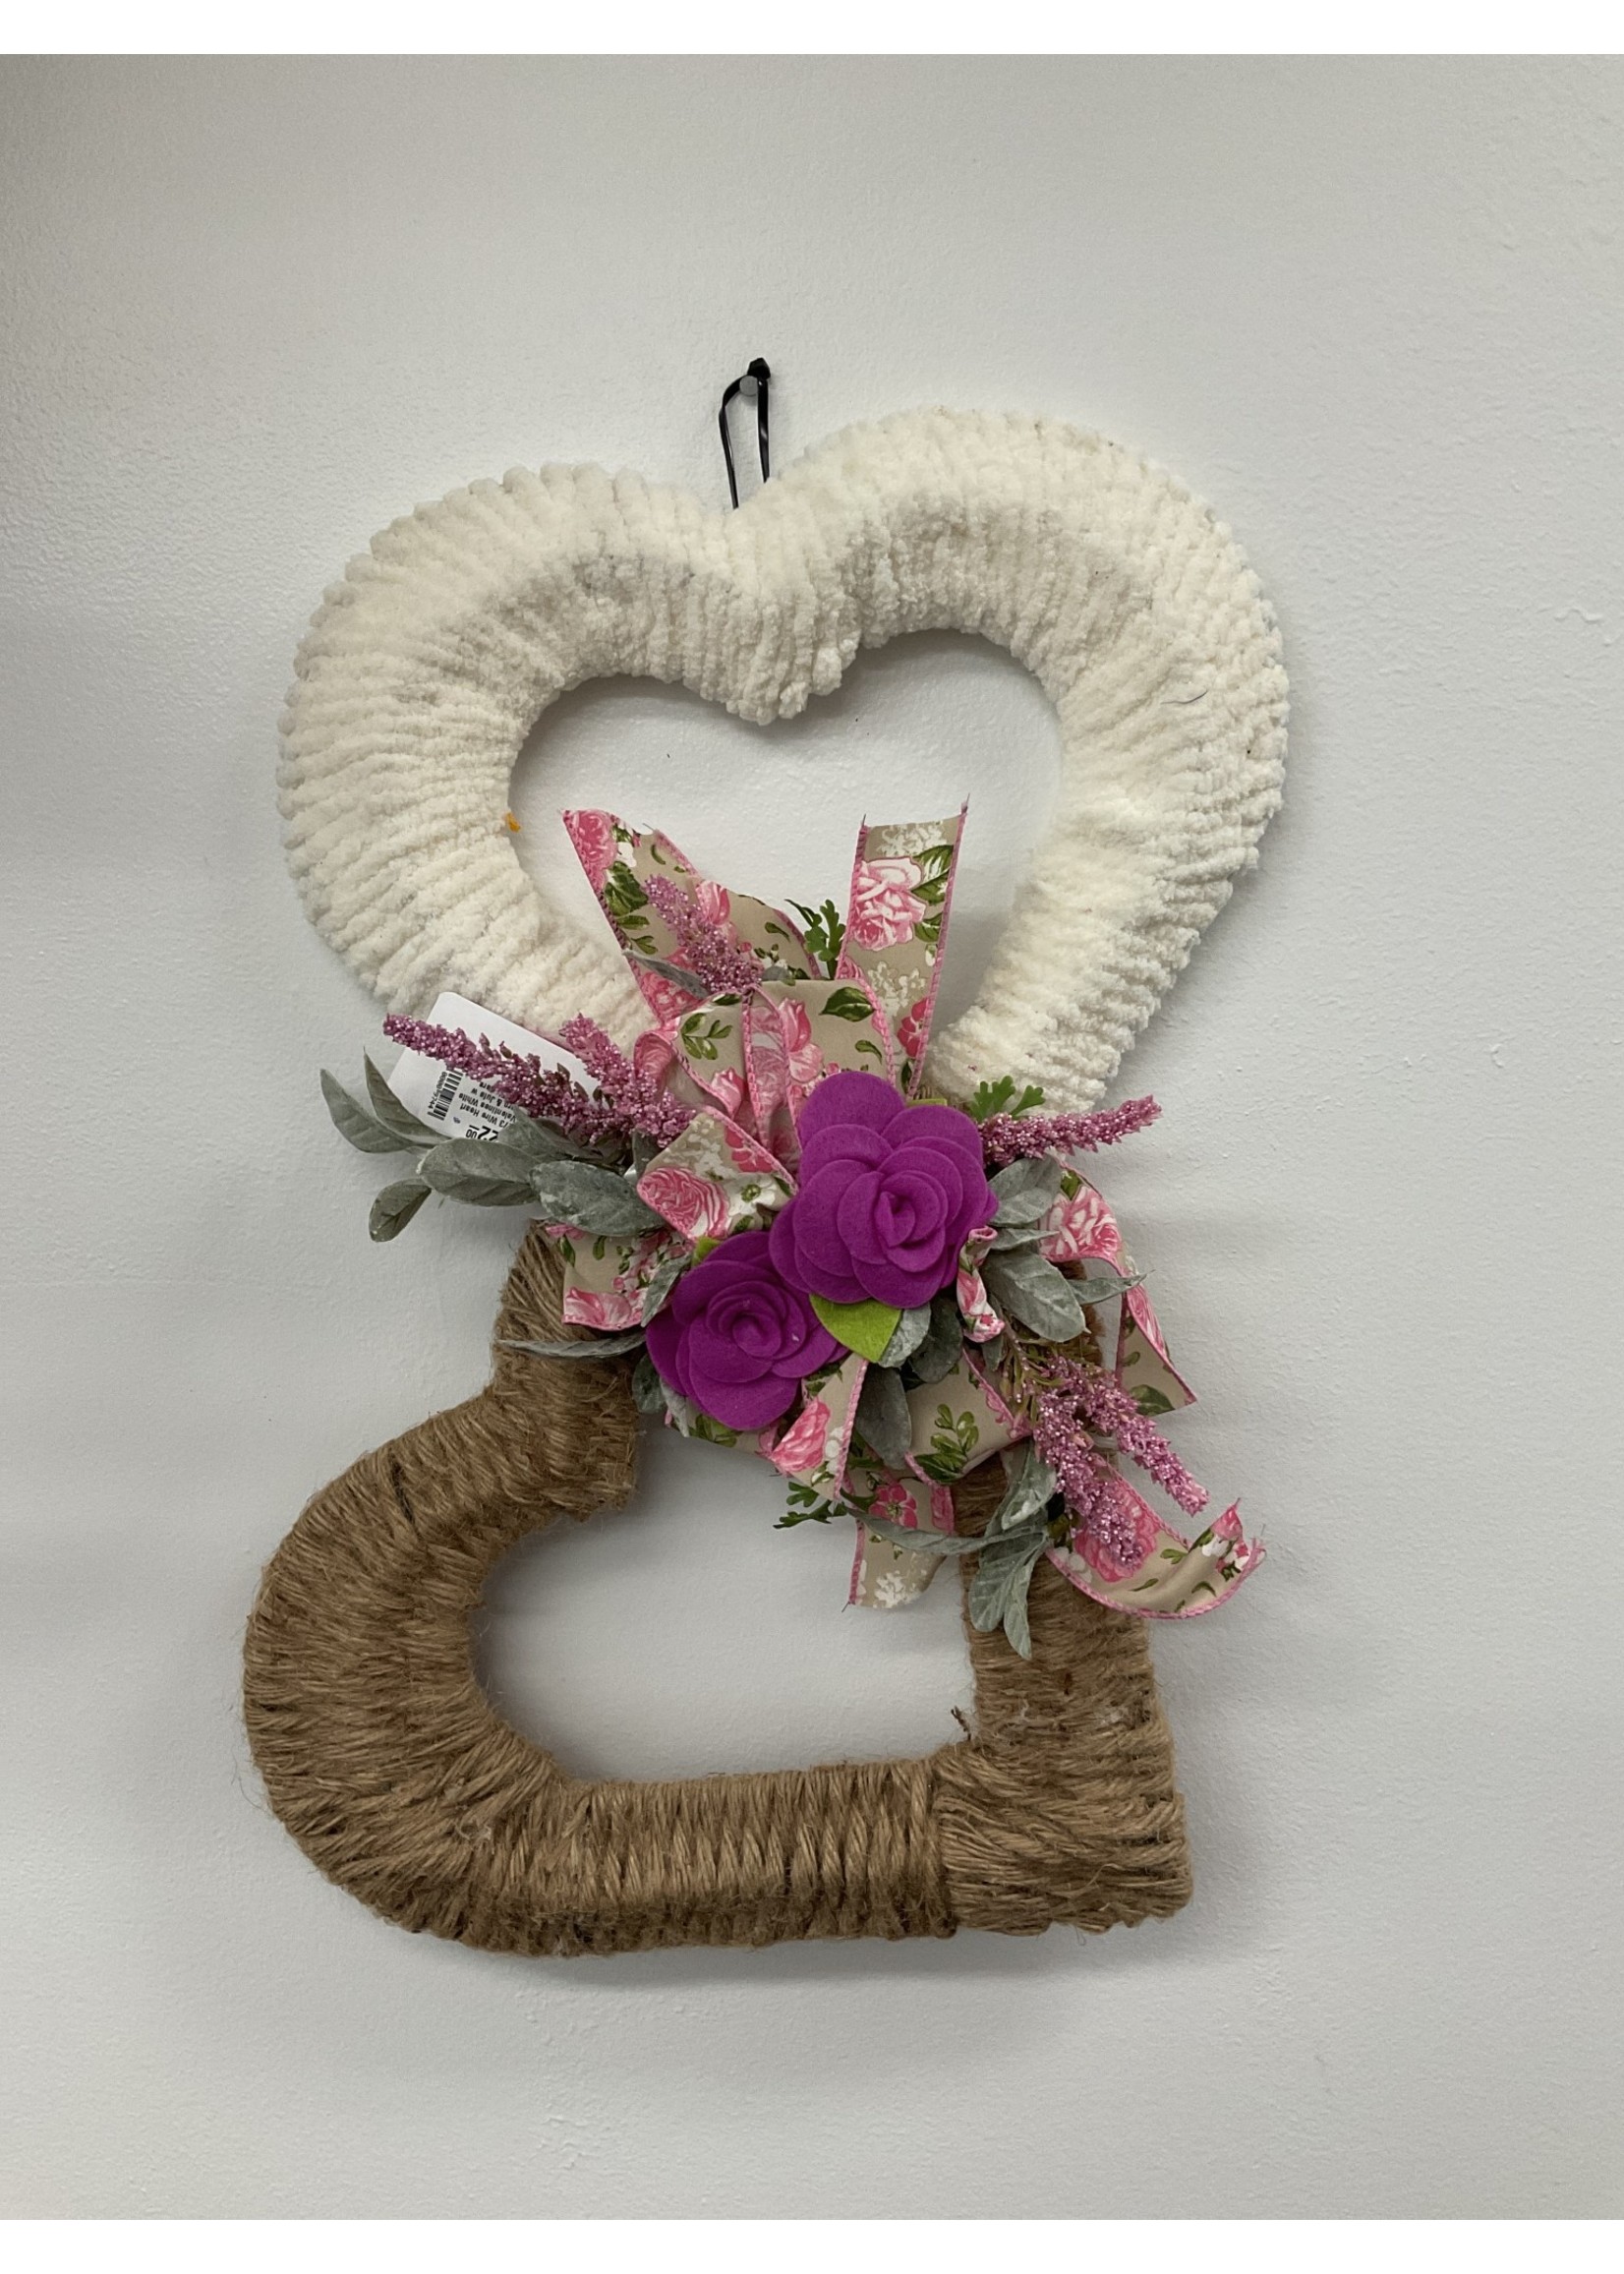 My New Favorite Thing Wreath White Yarn/Jute Heart Frame with Pink Flowers and Rose Ribbon